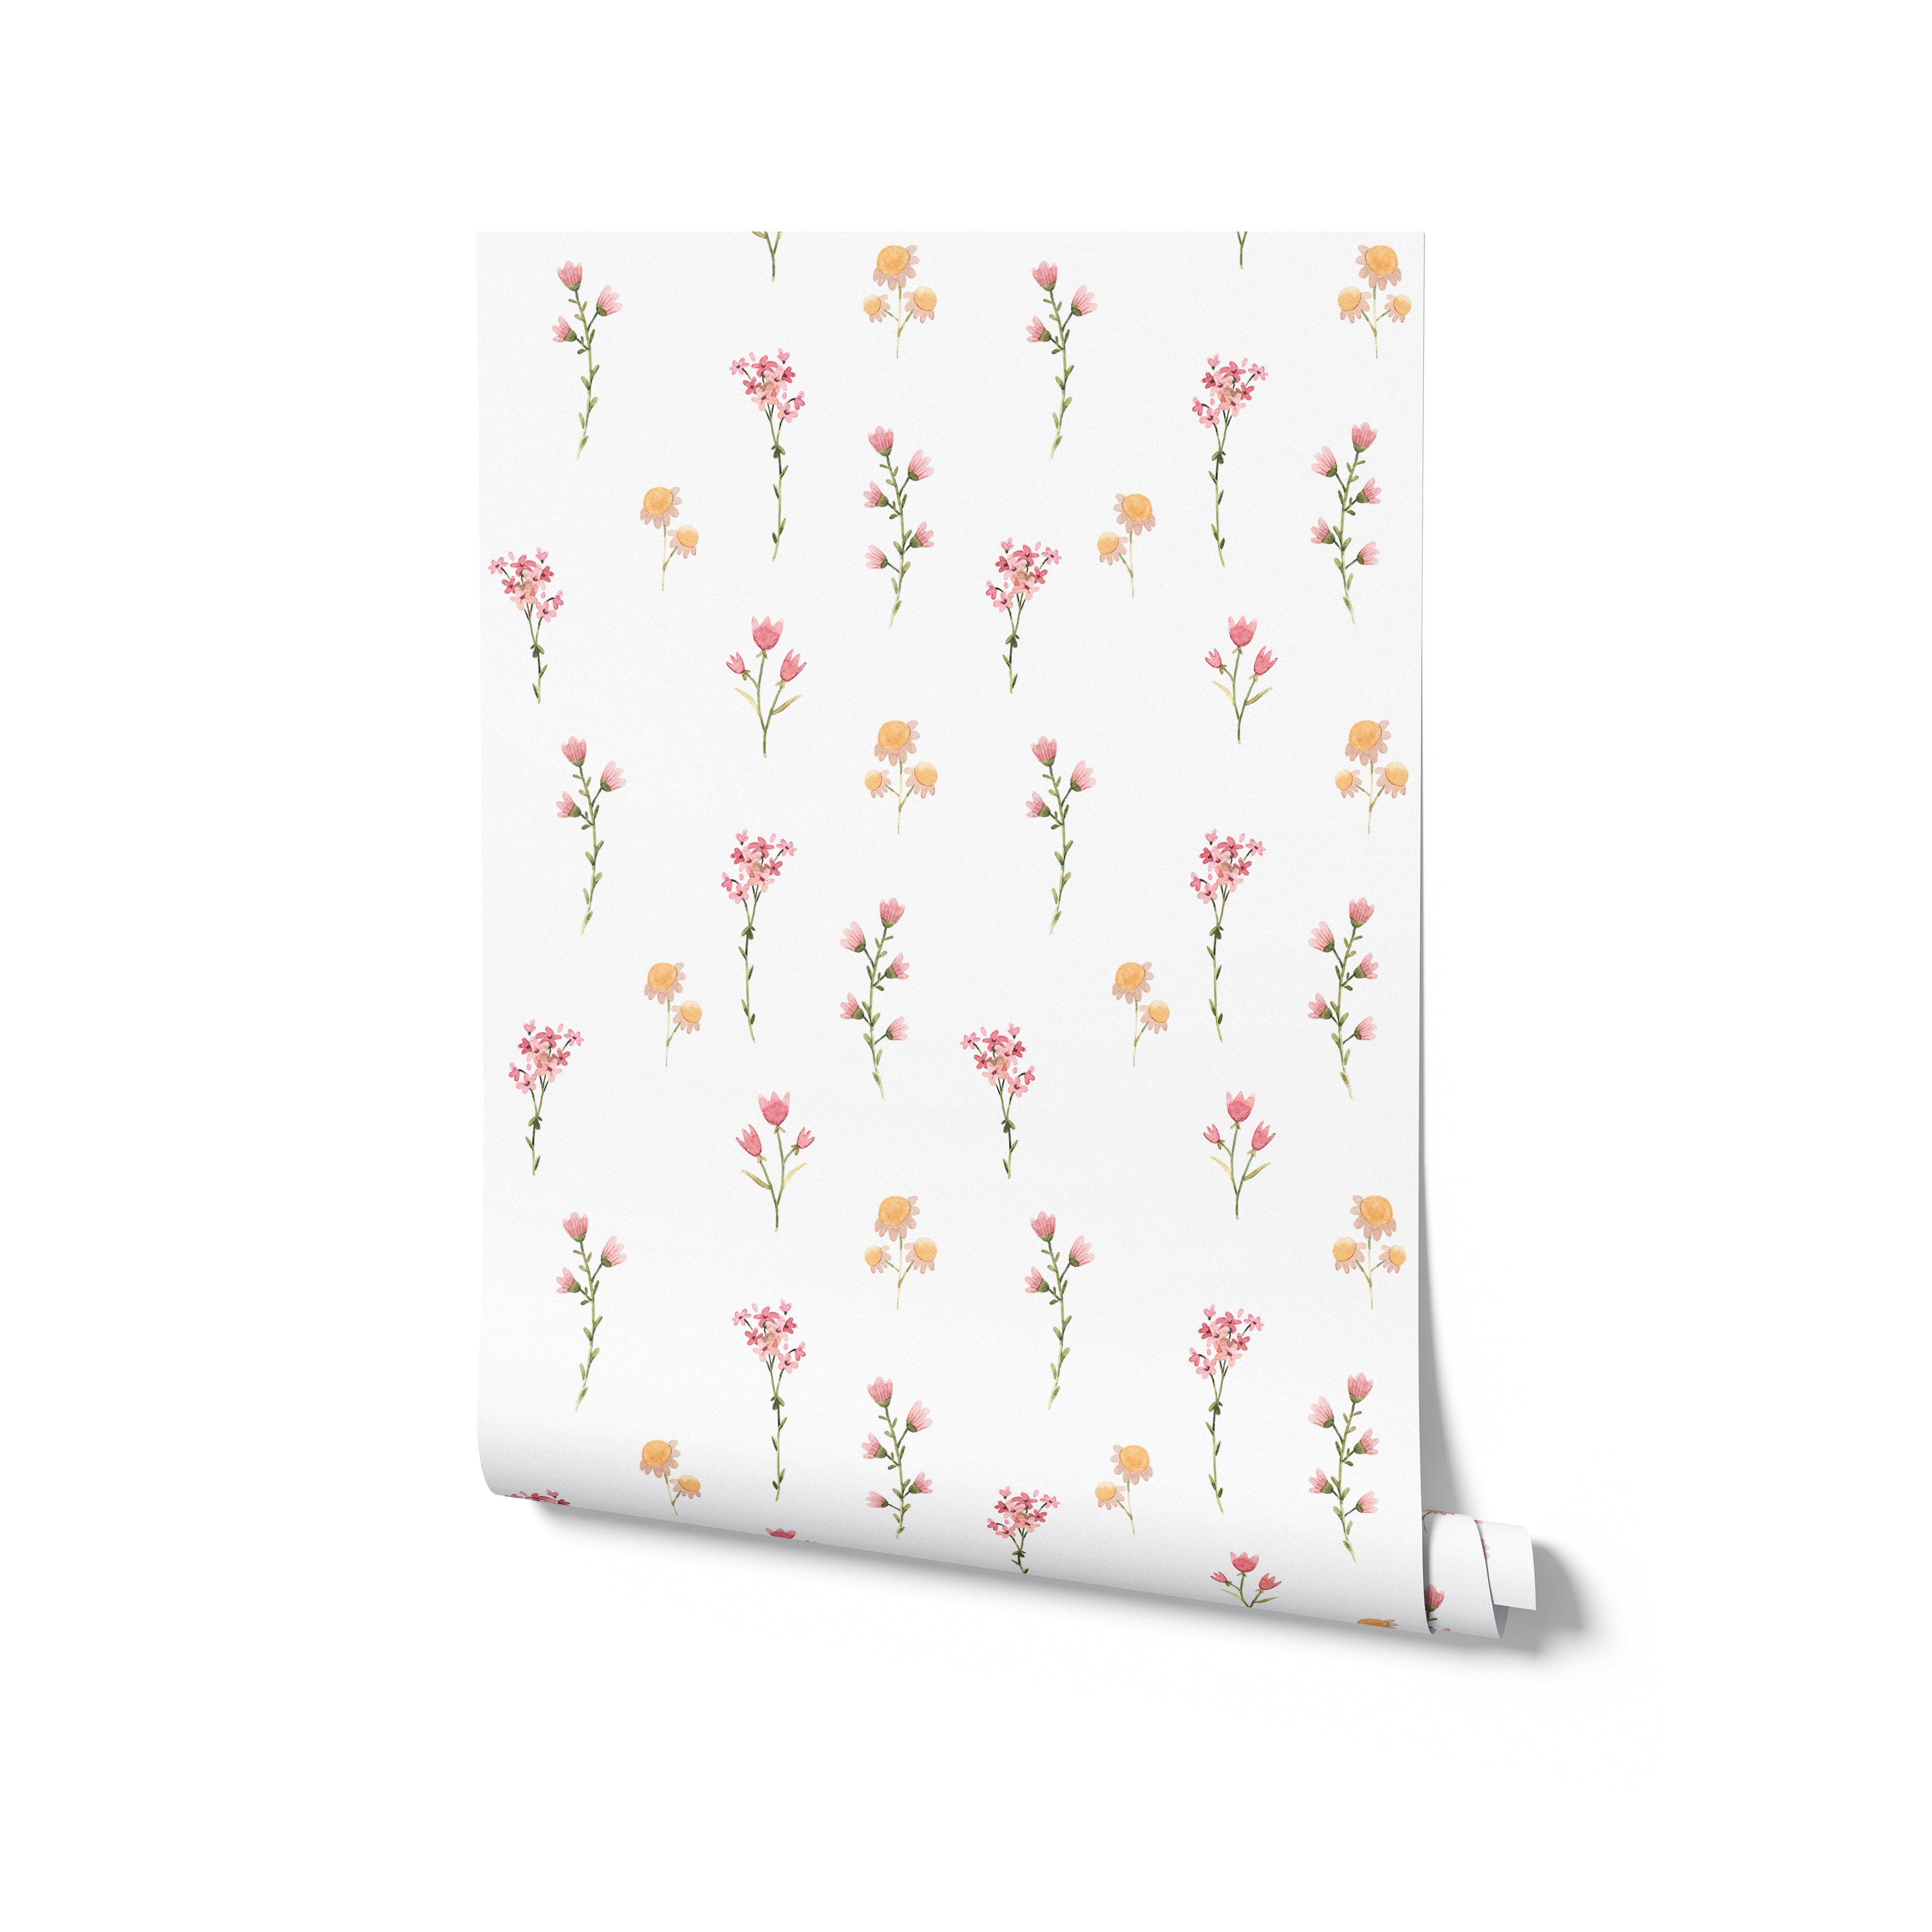 A roll of Gentle Floral Wallpaper, showcasing a soft and romantic floral design in pastel pink and yellow with green stems. This wallpaper is ideal for adding a bright and airy feel to any room, particularly bedrooms and living areas